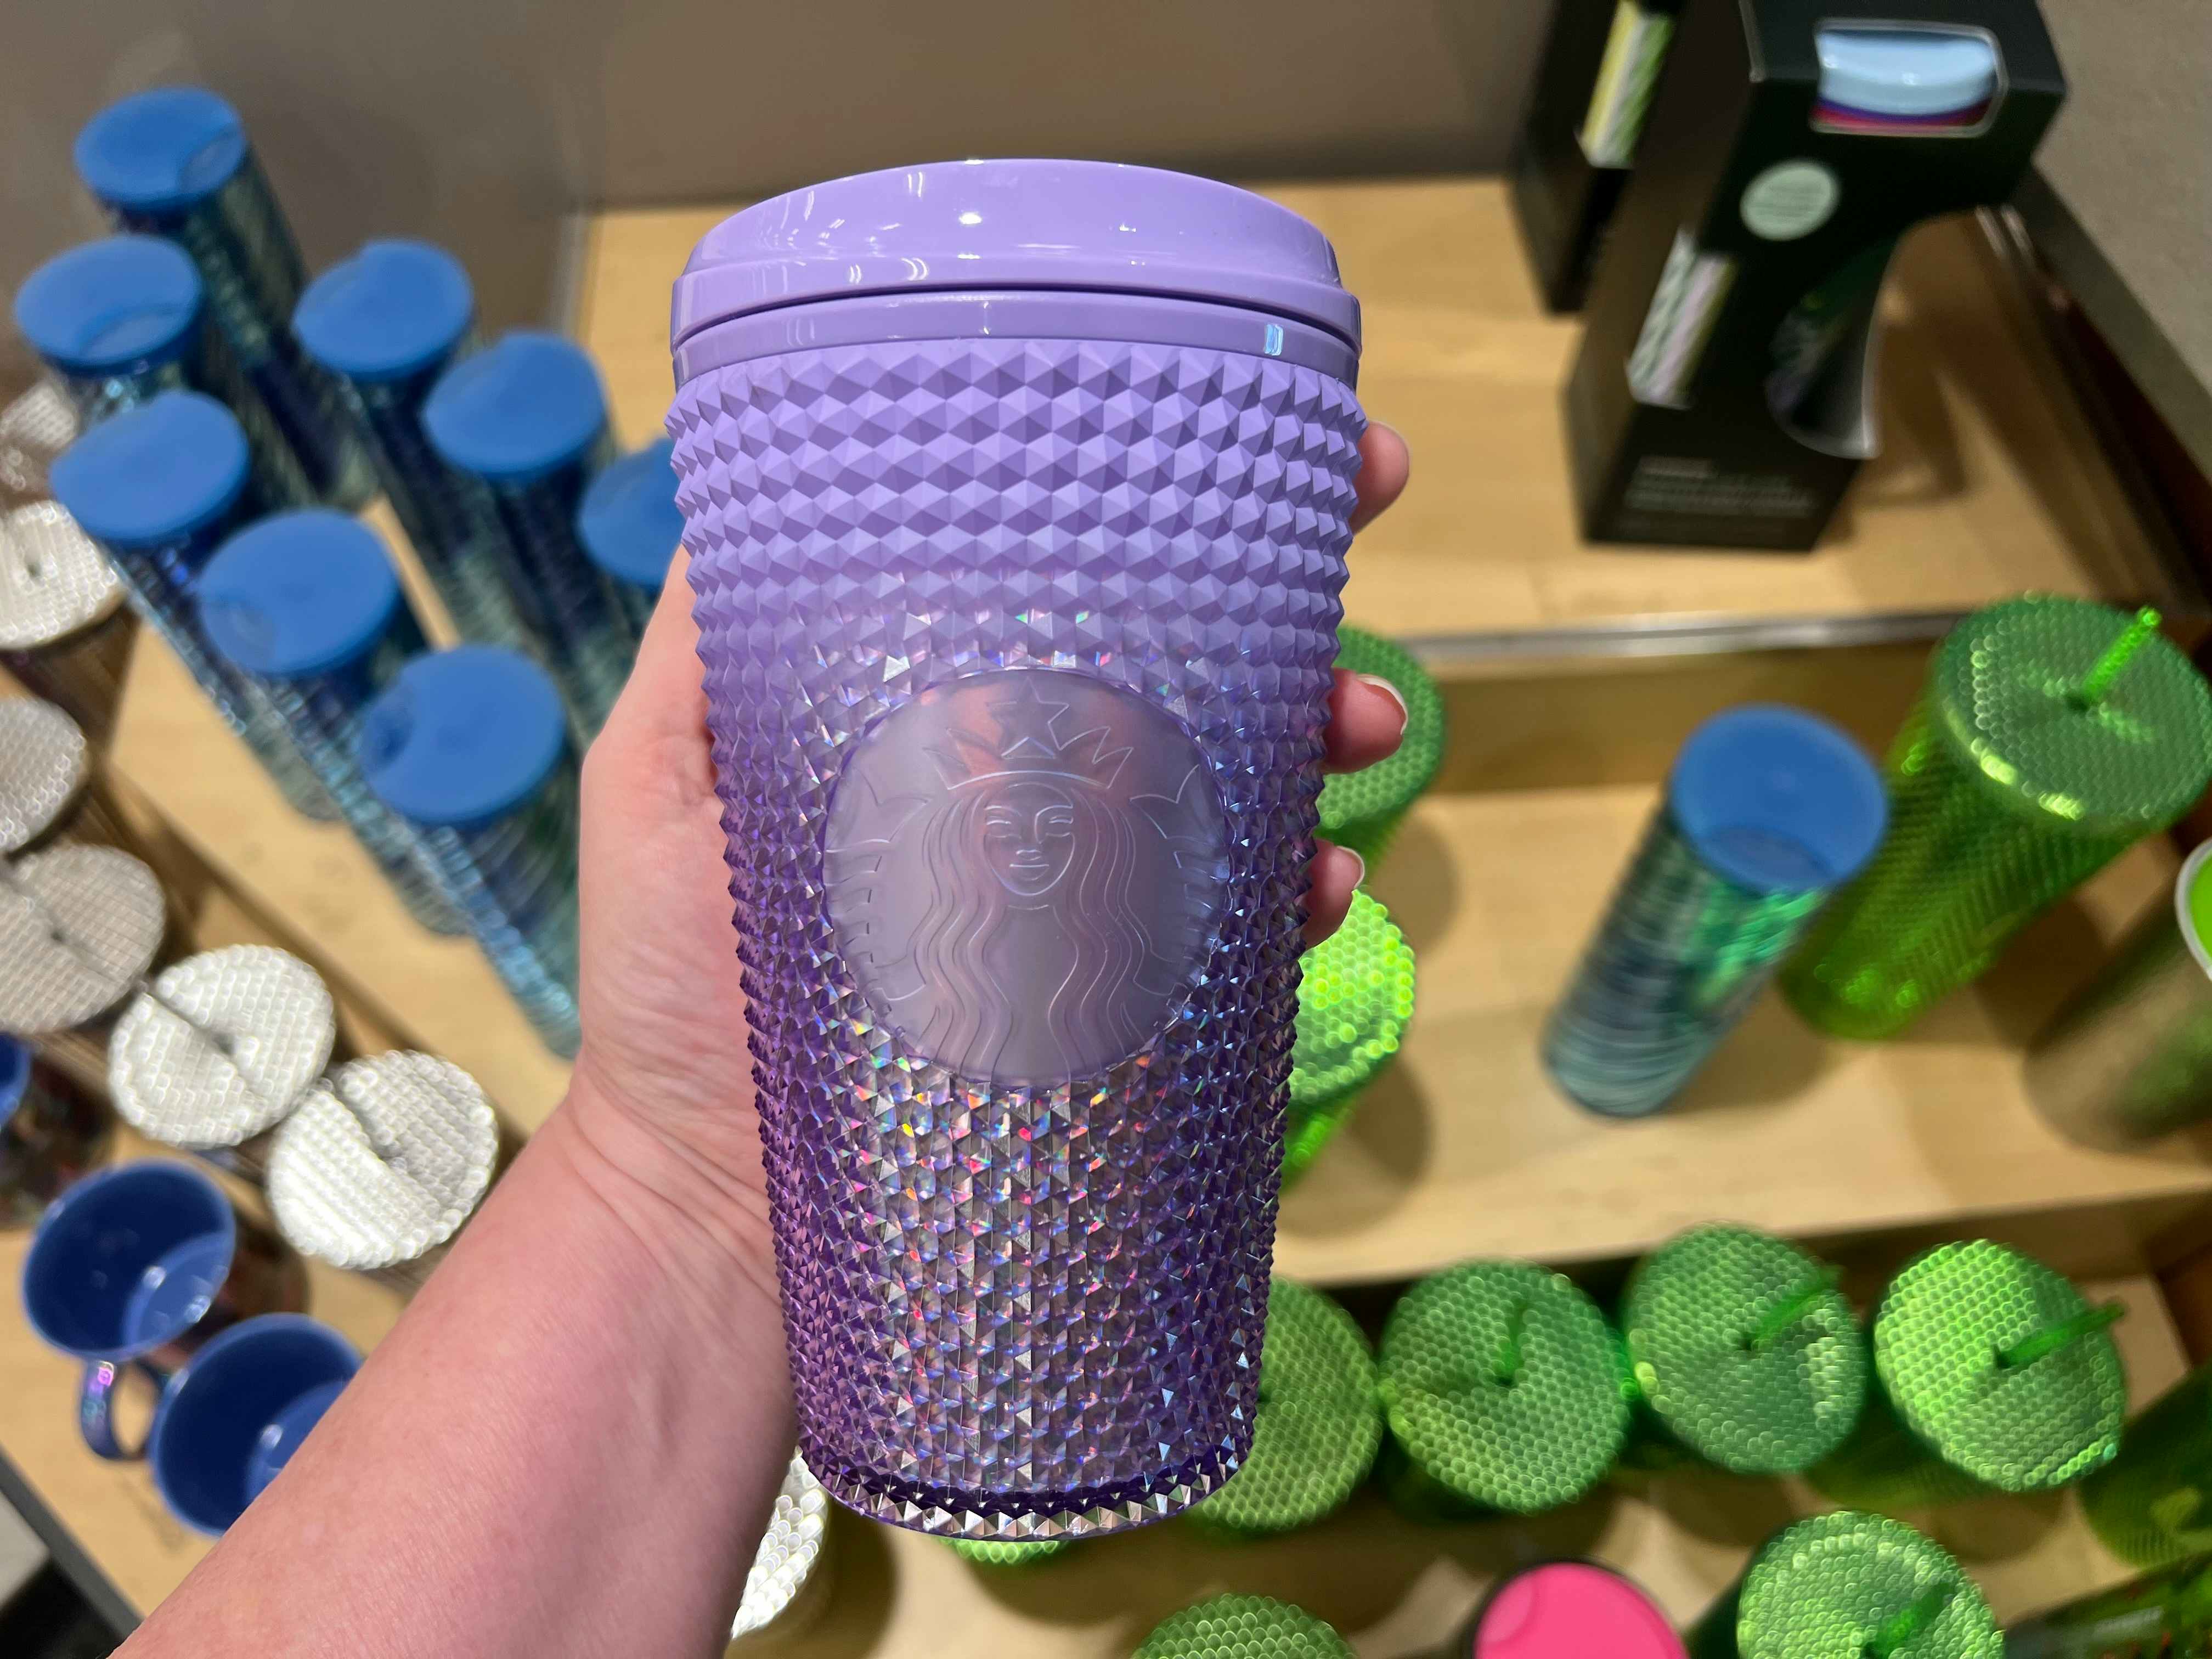 https://prod-cdn-thekrazycouponlady.imgix.net/wp-content/uploads/2023/12/starbucks-winter-cups-purple-crystal-ombre-cup-1701974090-1701974090.jpg?auto=format&fit=fill&q=25